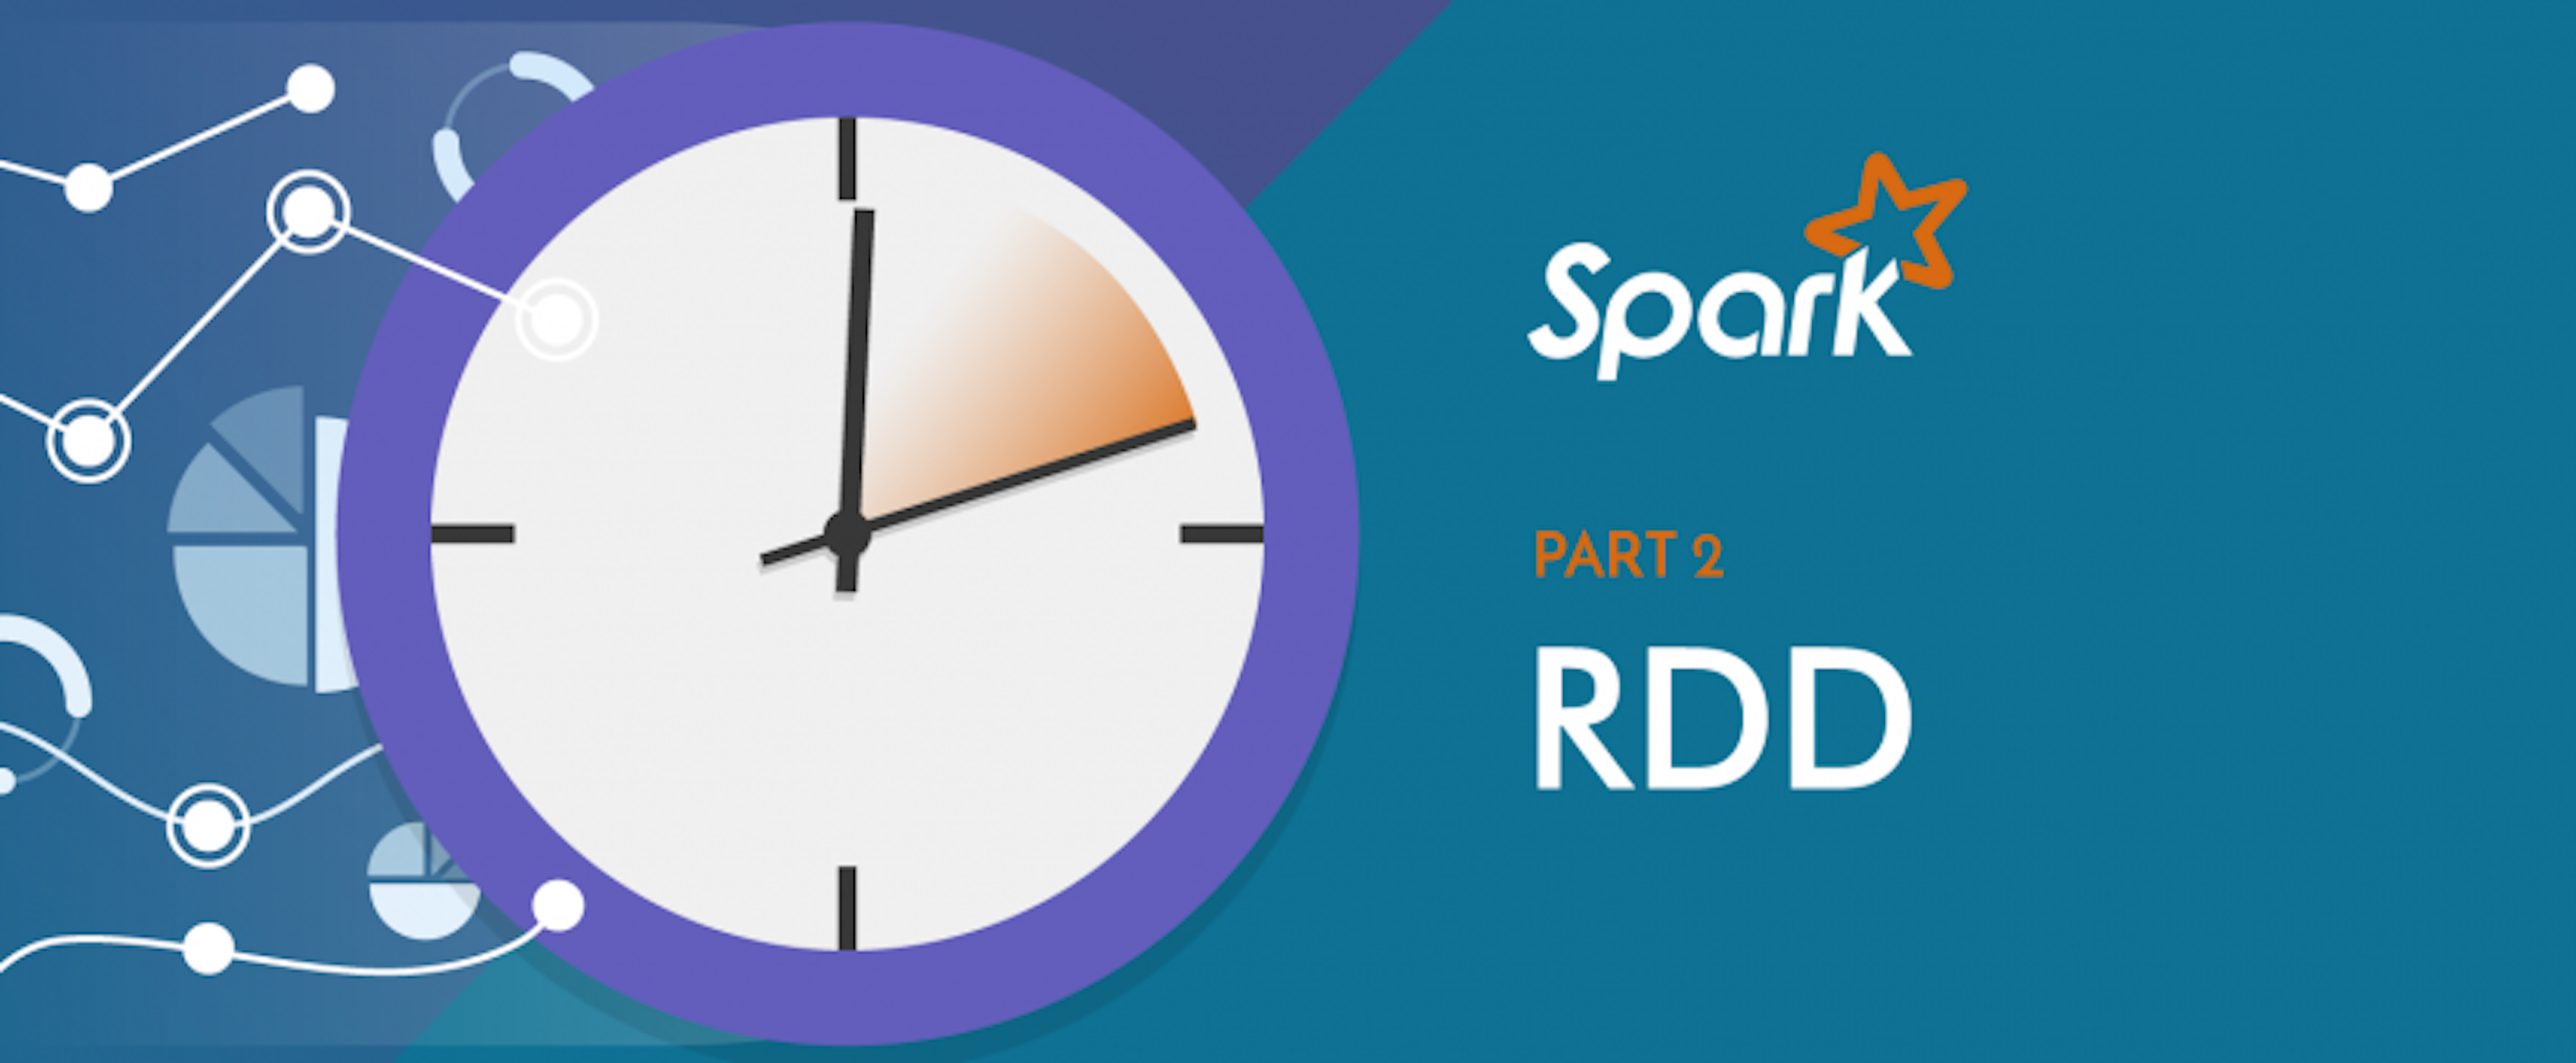 Practical Apache Spark in 10 minutes. Part 2 - RDD